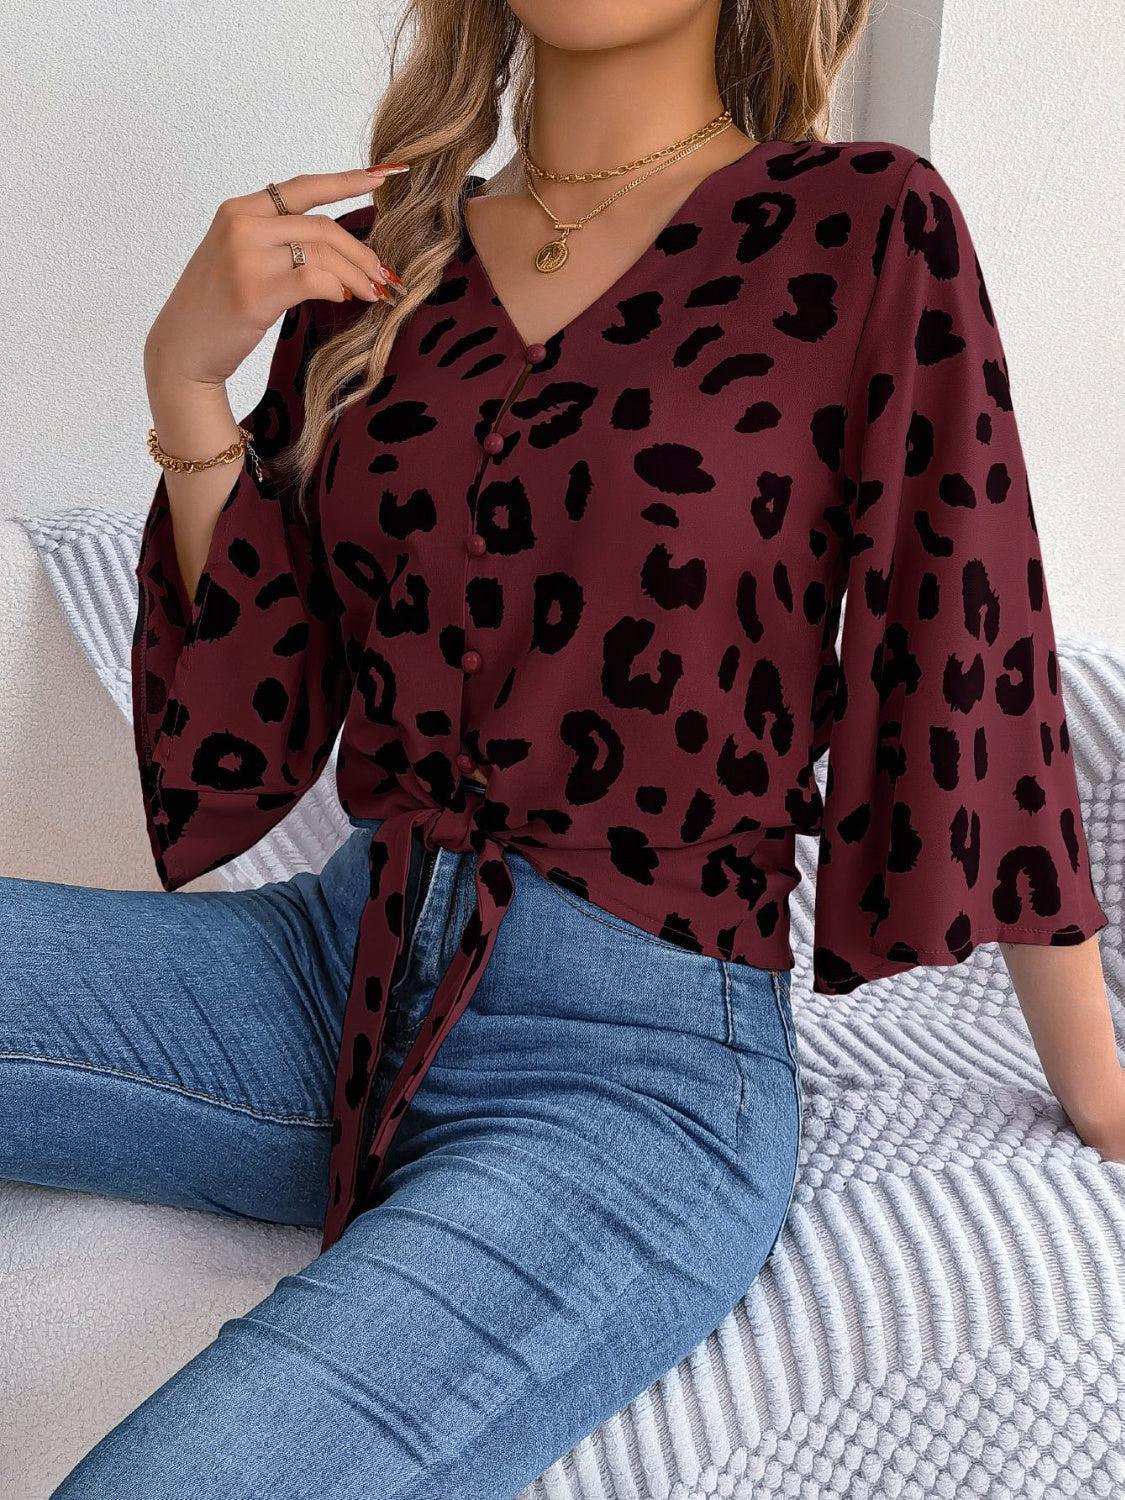 a woman sitting on a bed wearing a leopard print top